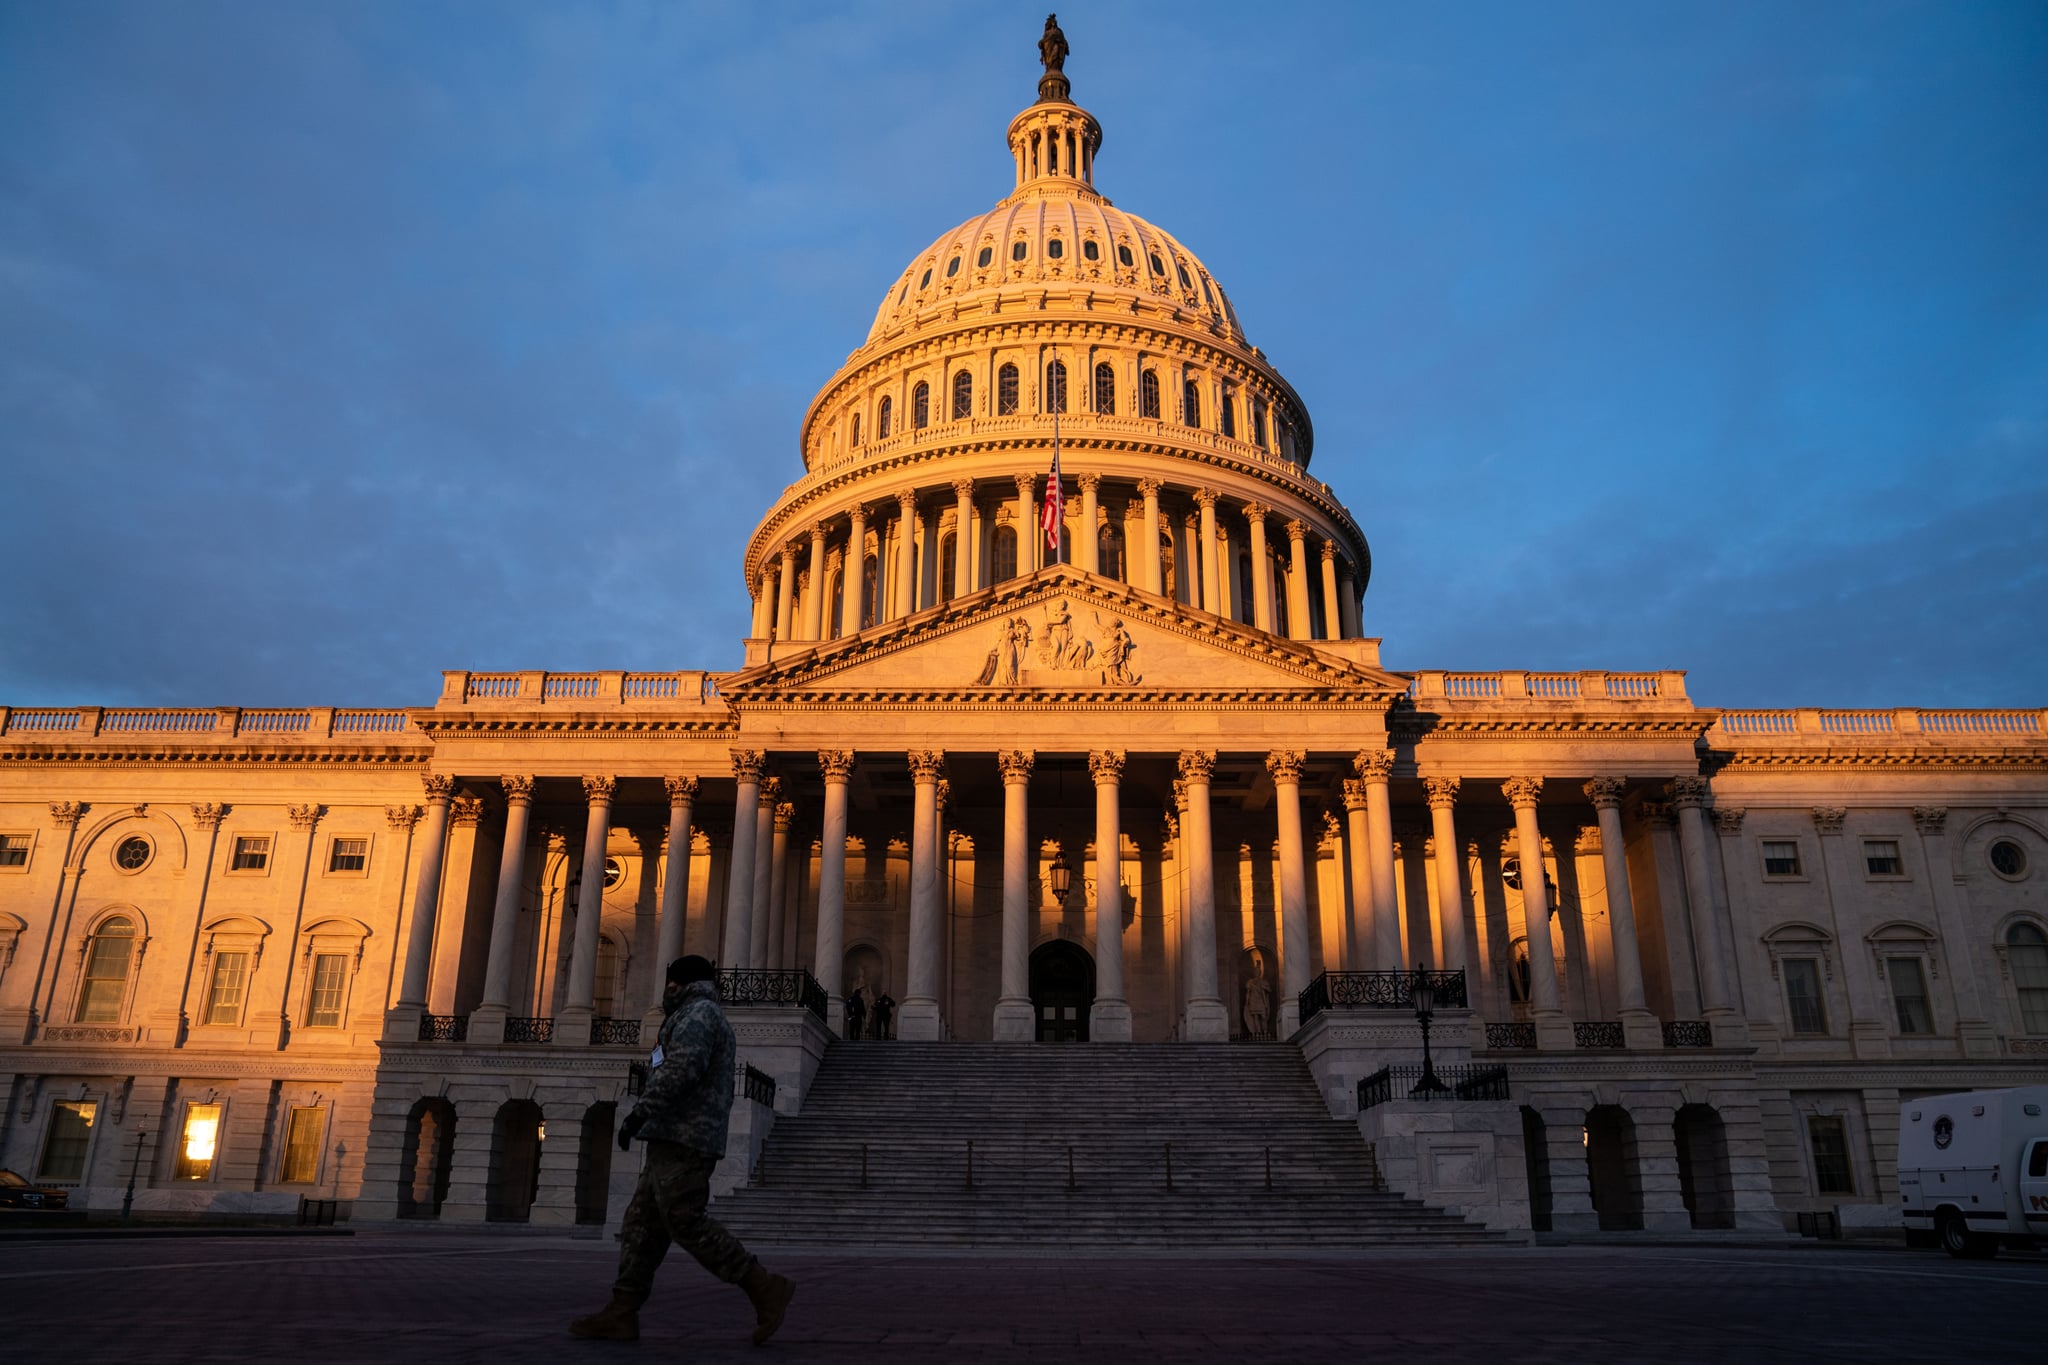 WASHINGTON, DC - JANUARY 11: The sun rises on the  U.S. Capitol Building, where heightened security measures are in place nearly a week after a pro-Trump insurrectionist mob breached the security of the nations capitol while Congress voted to certify the 2020 Election Results on Monday, Jan. 11, 2021 in Washington, DC. (Kent Nishimura / Los Angeles Times via Getty Images)